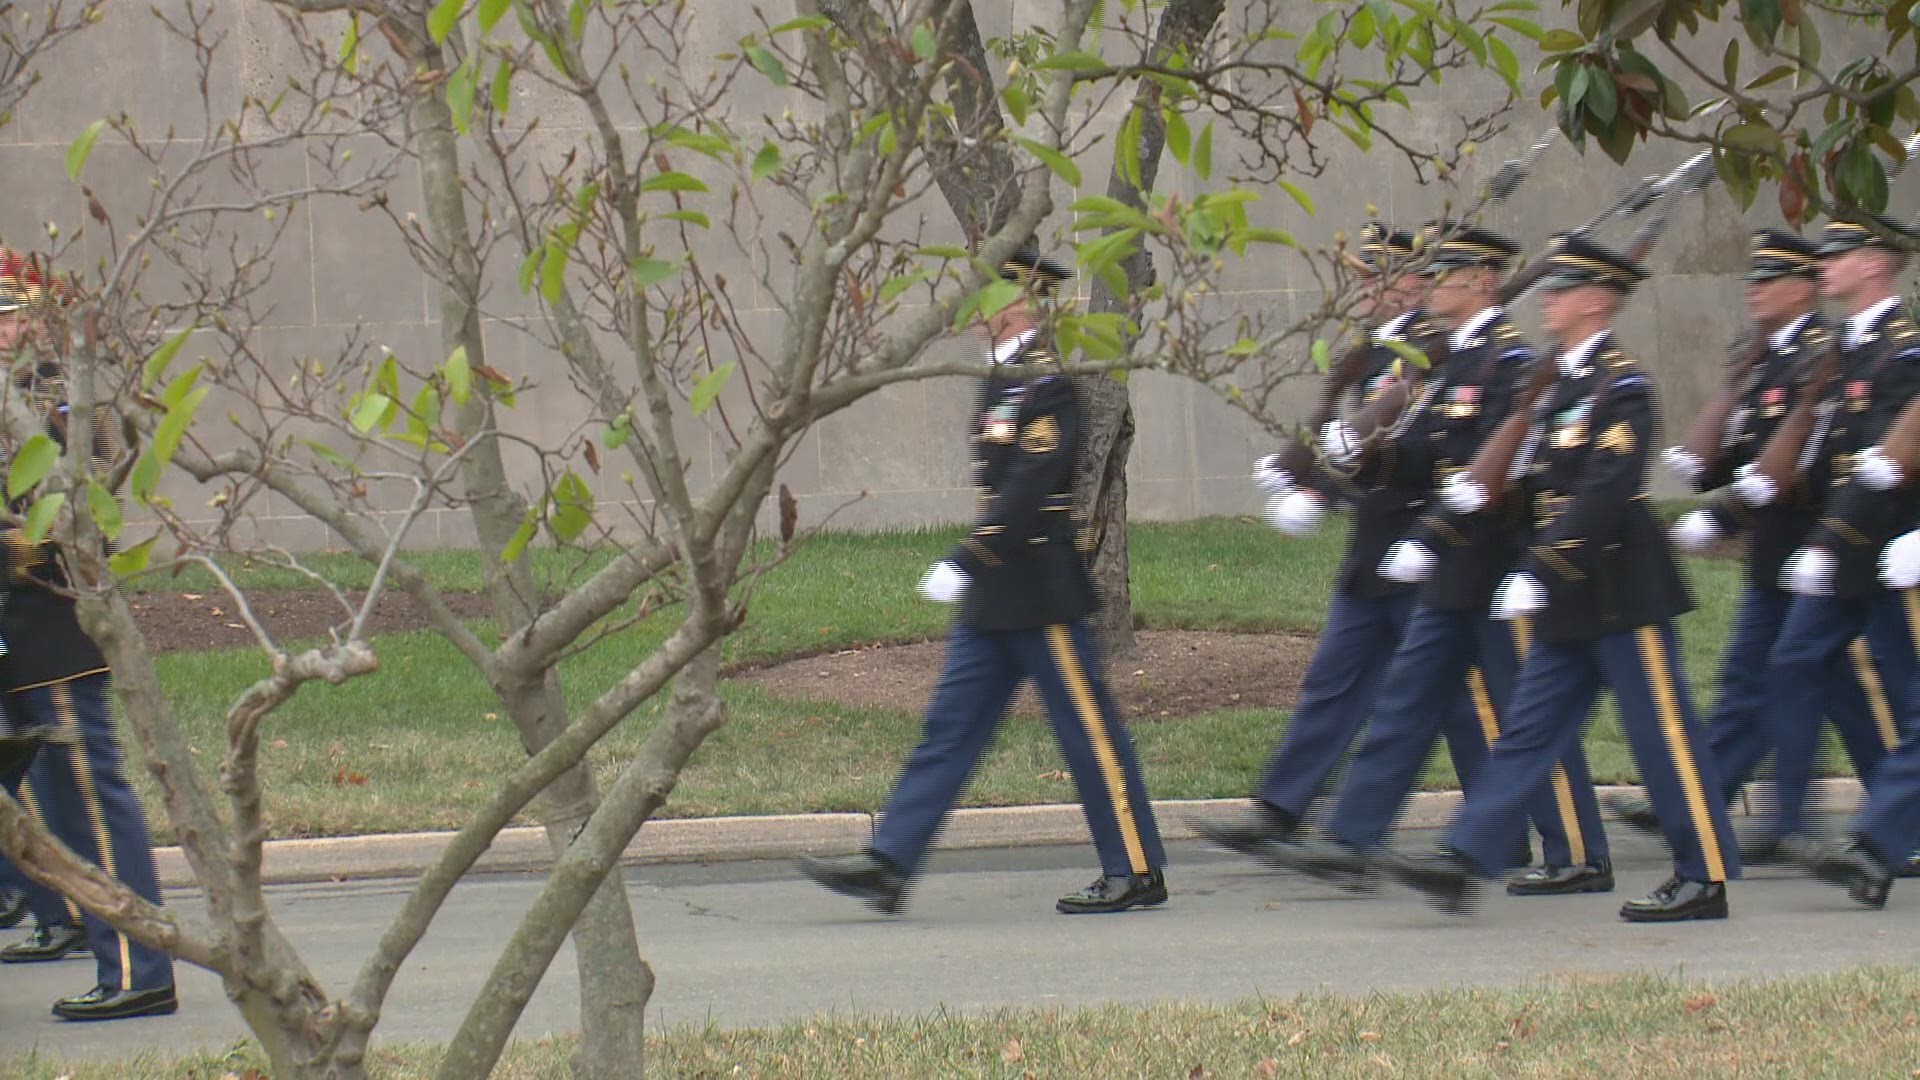 After a 76 years-long search for the remains of a World War II veteran, the remains of his crew member was found and laid to rest at the Arlington National Cemetery.